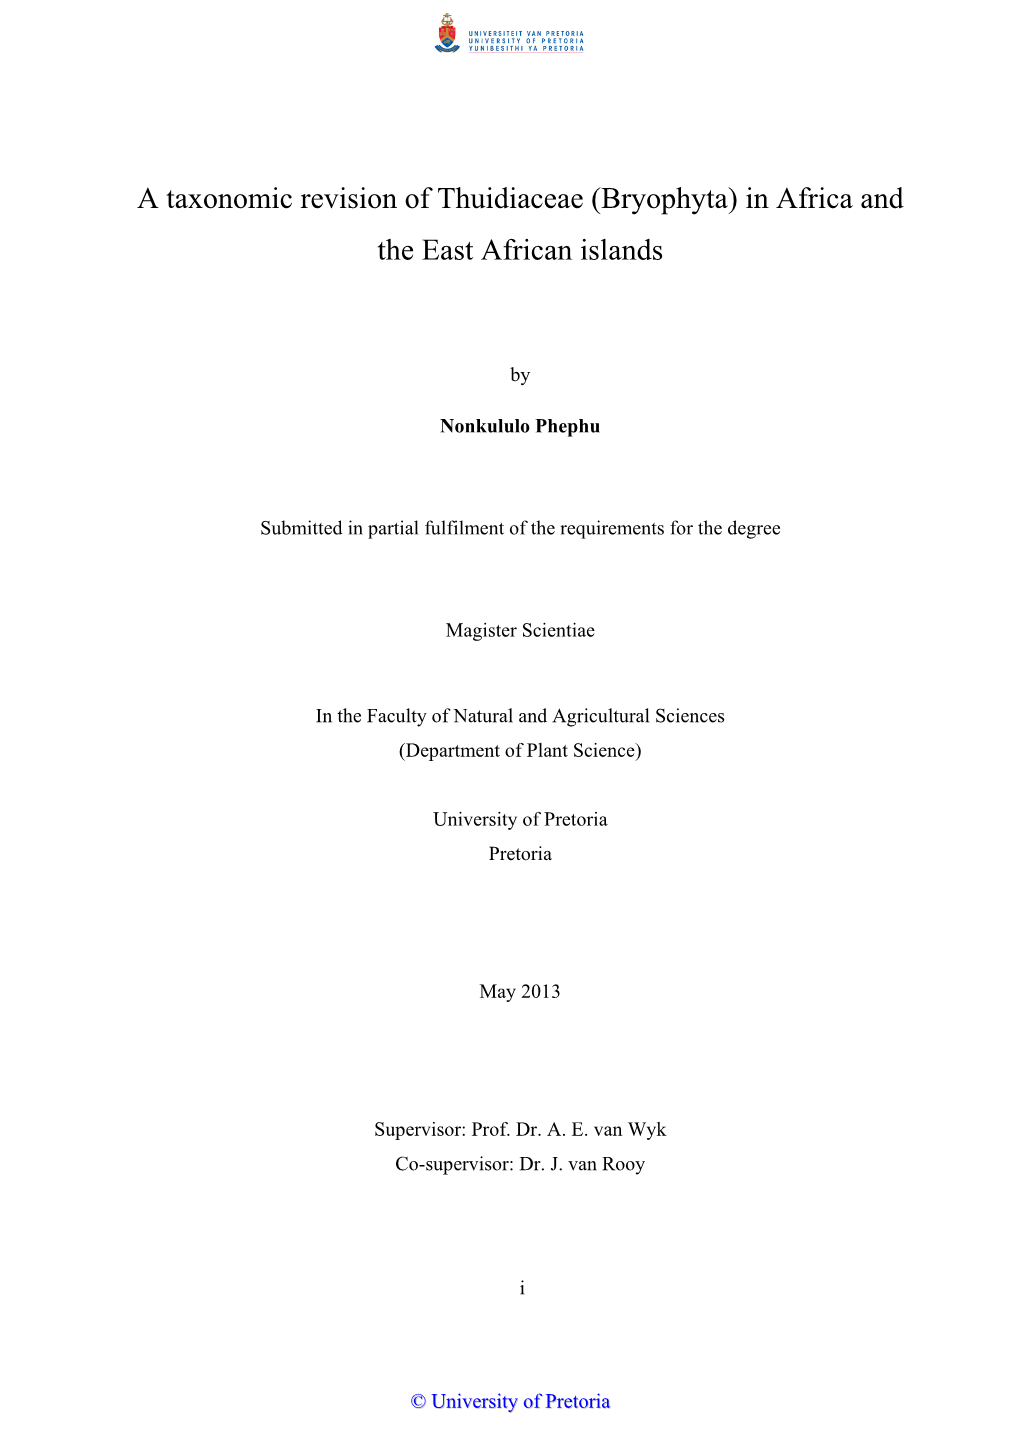 A Taxonomic Revision of Thuidiaceae (Bryophyta) in Africa and the East African Islands